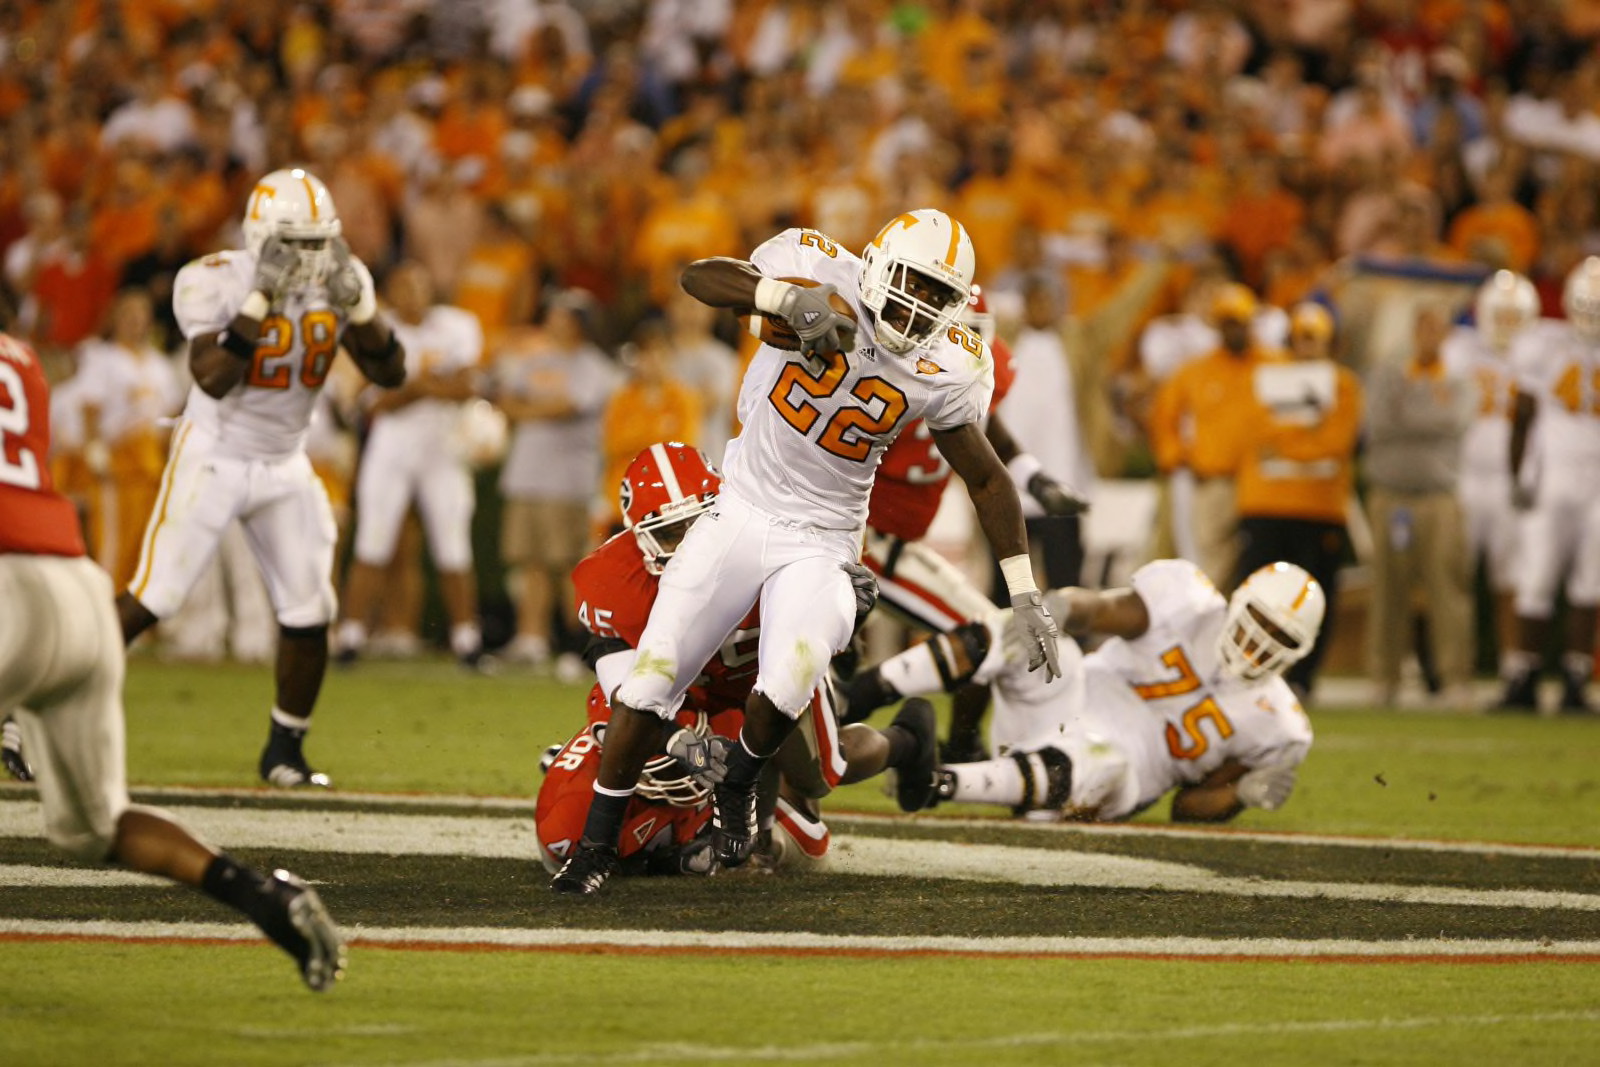 Vols return opening kickoff for TD, first since '80